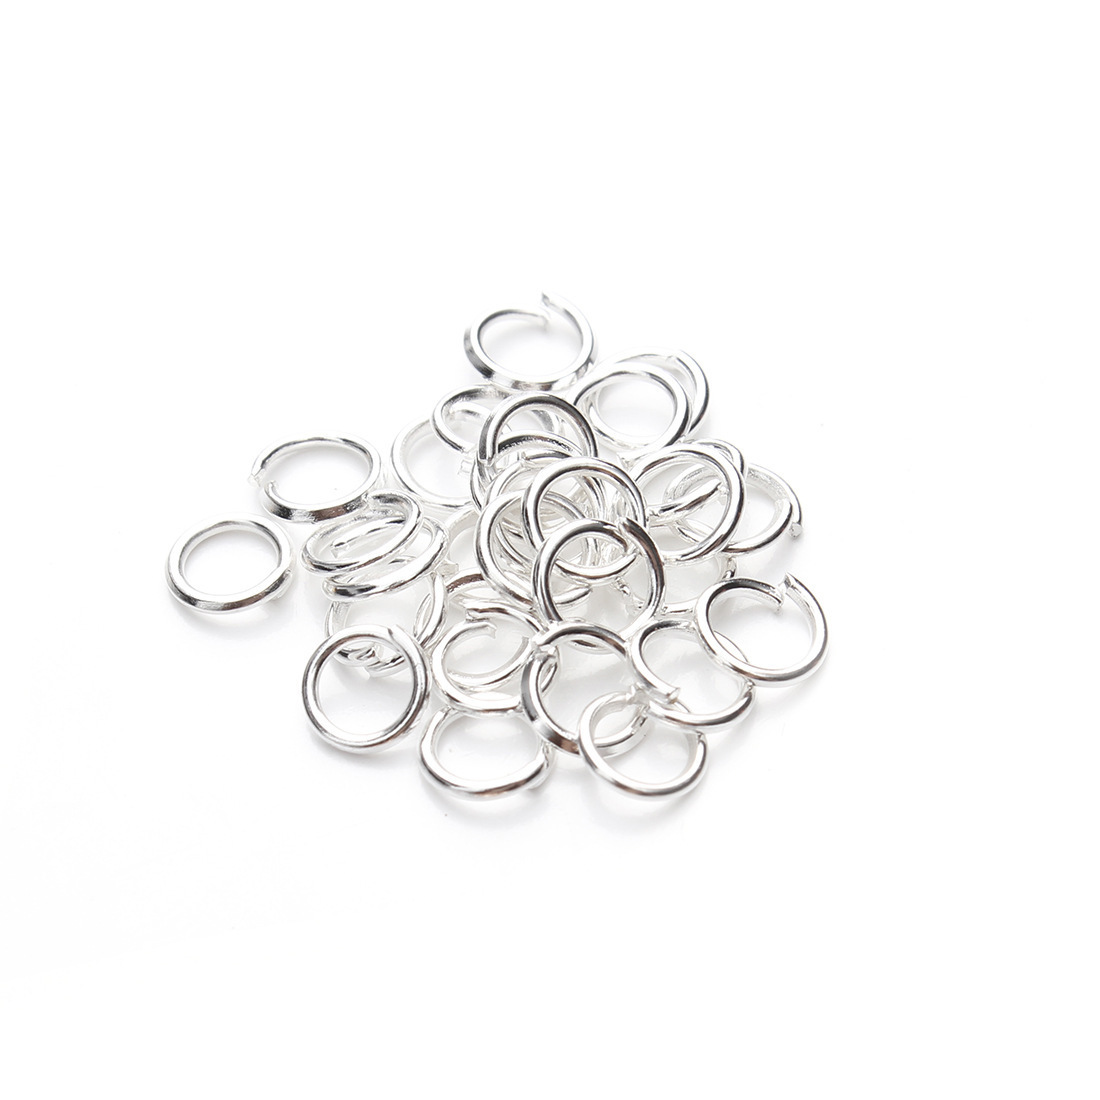 Silver outer diameter 18mm